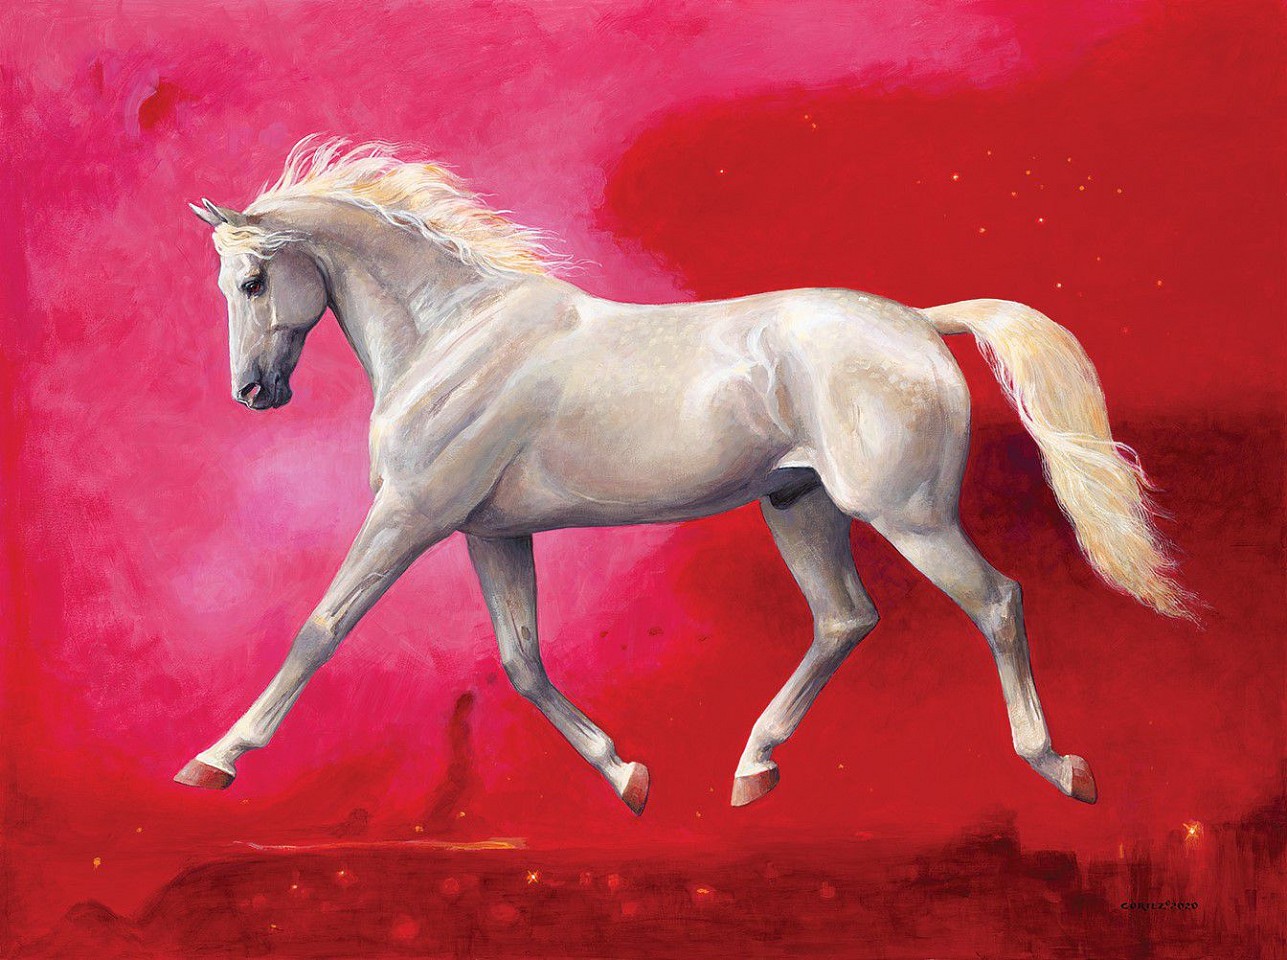 Jenness Cortez, The Whitest Horse Red #2, 2020
acrylic on mahogany panel, 30 x 40 in. (76.2 x 101.6 cm)
JC200202